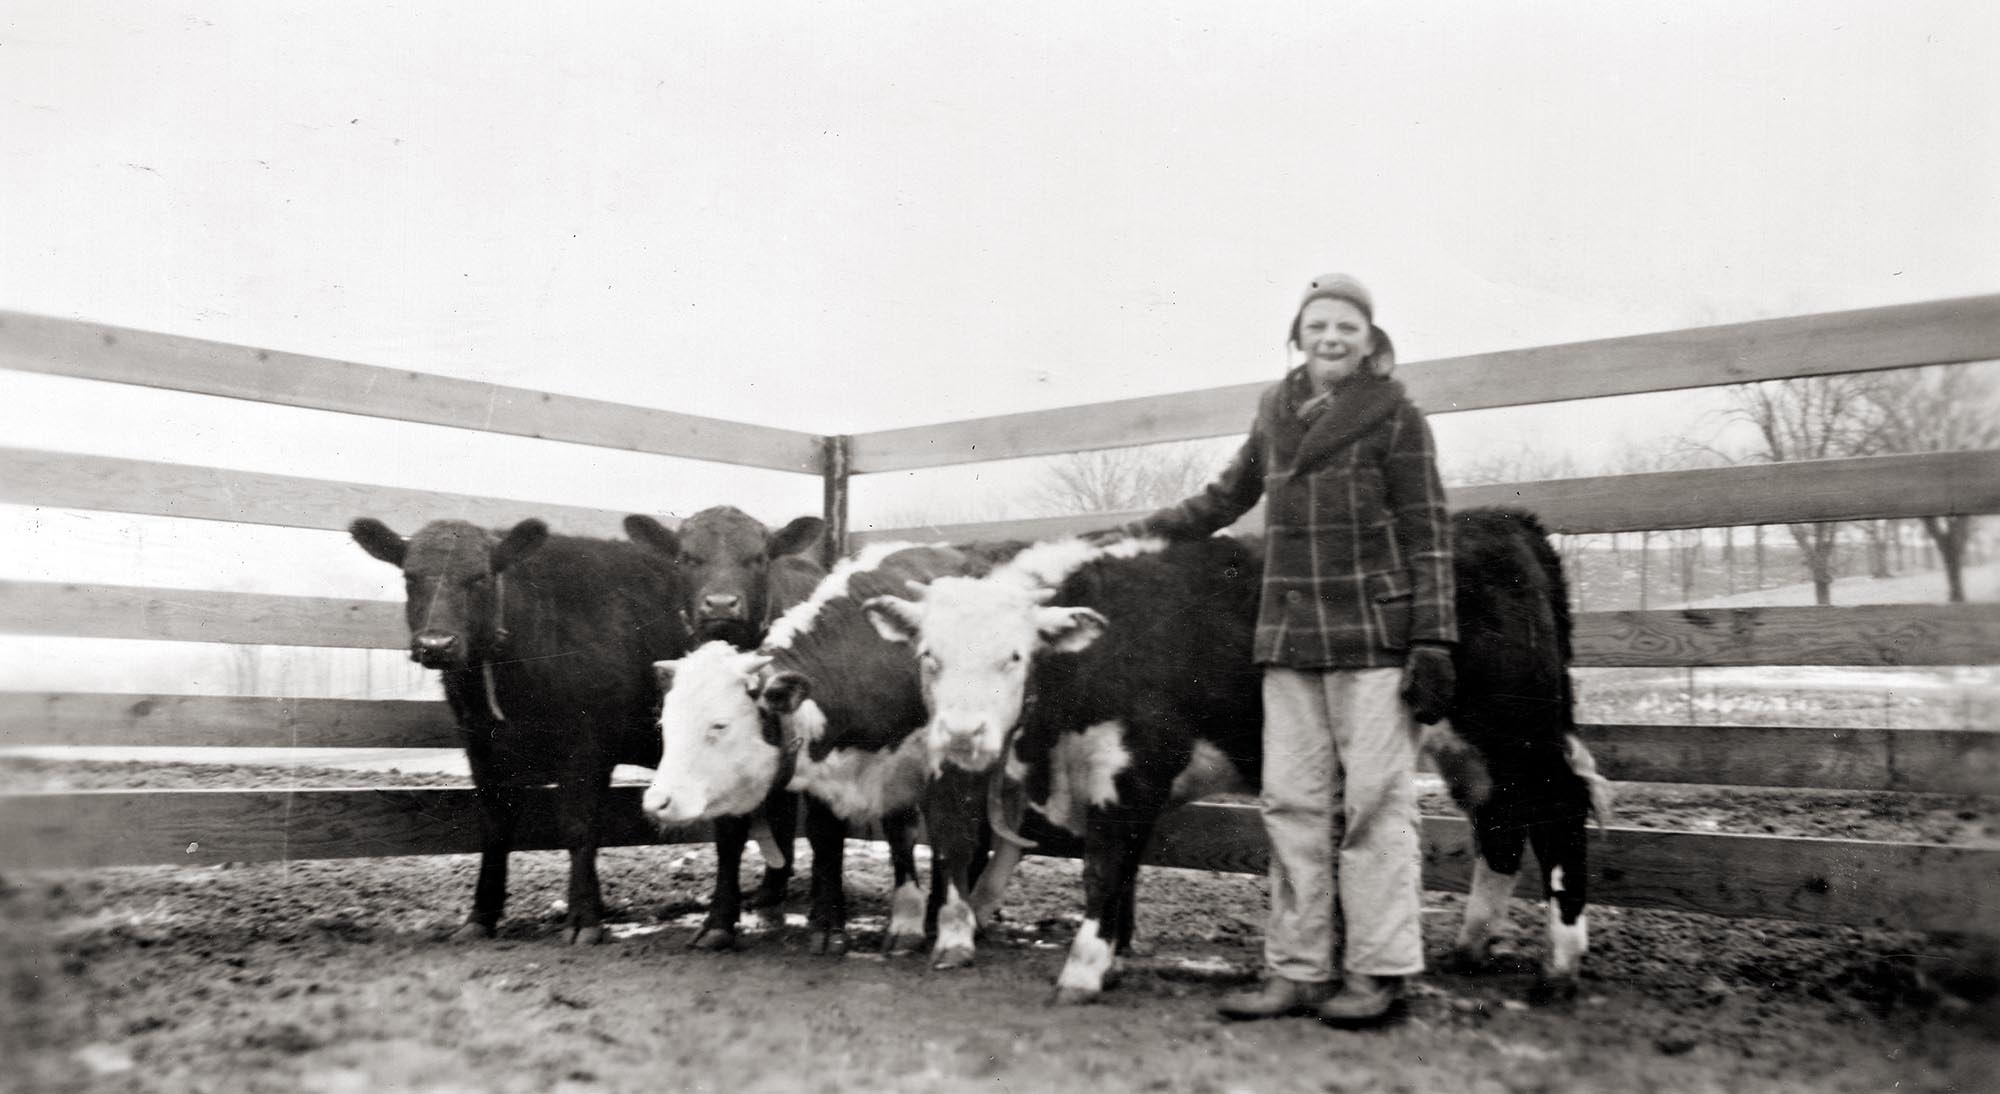 Willard J. Haak Jr. with his pet cows, 1942. The photo was taken at the Willard S. Haak Cattle and Dairy Farms in Marion, Iowa. Haak Jr. (1928 - 2017) was a Peoria resident and later employed as an engineer for Caterpillar, Inc. in research and development for 37 years, retiring in 1993.